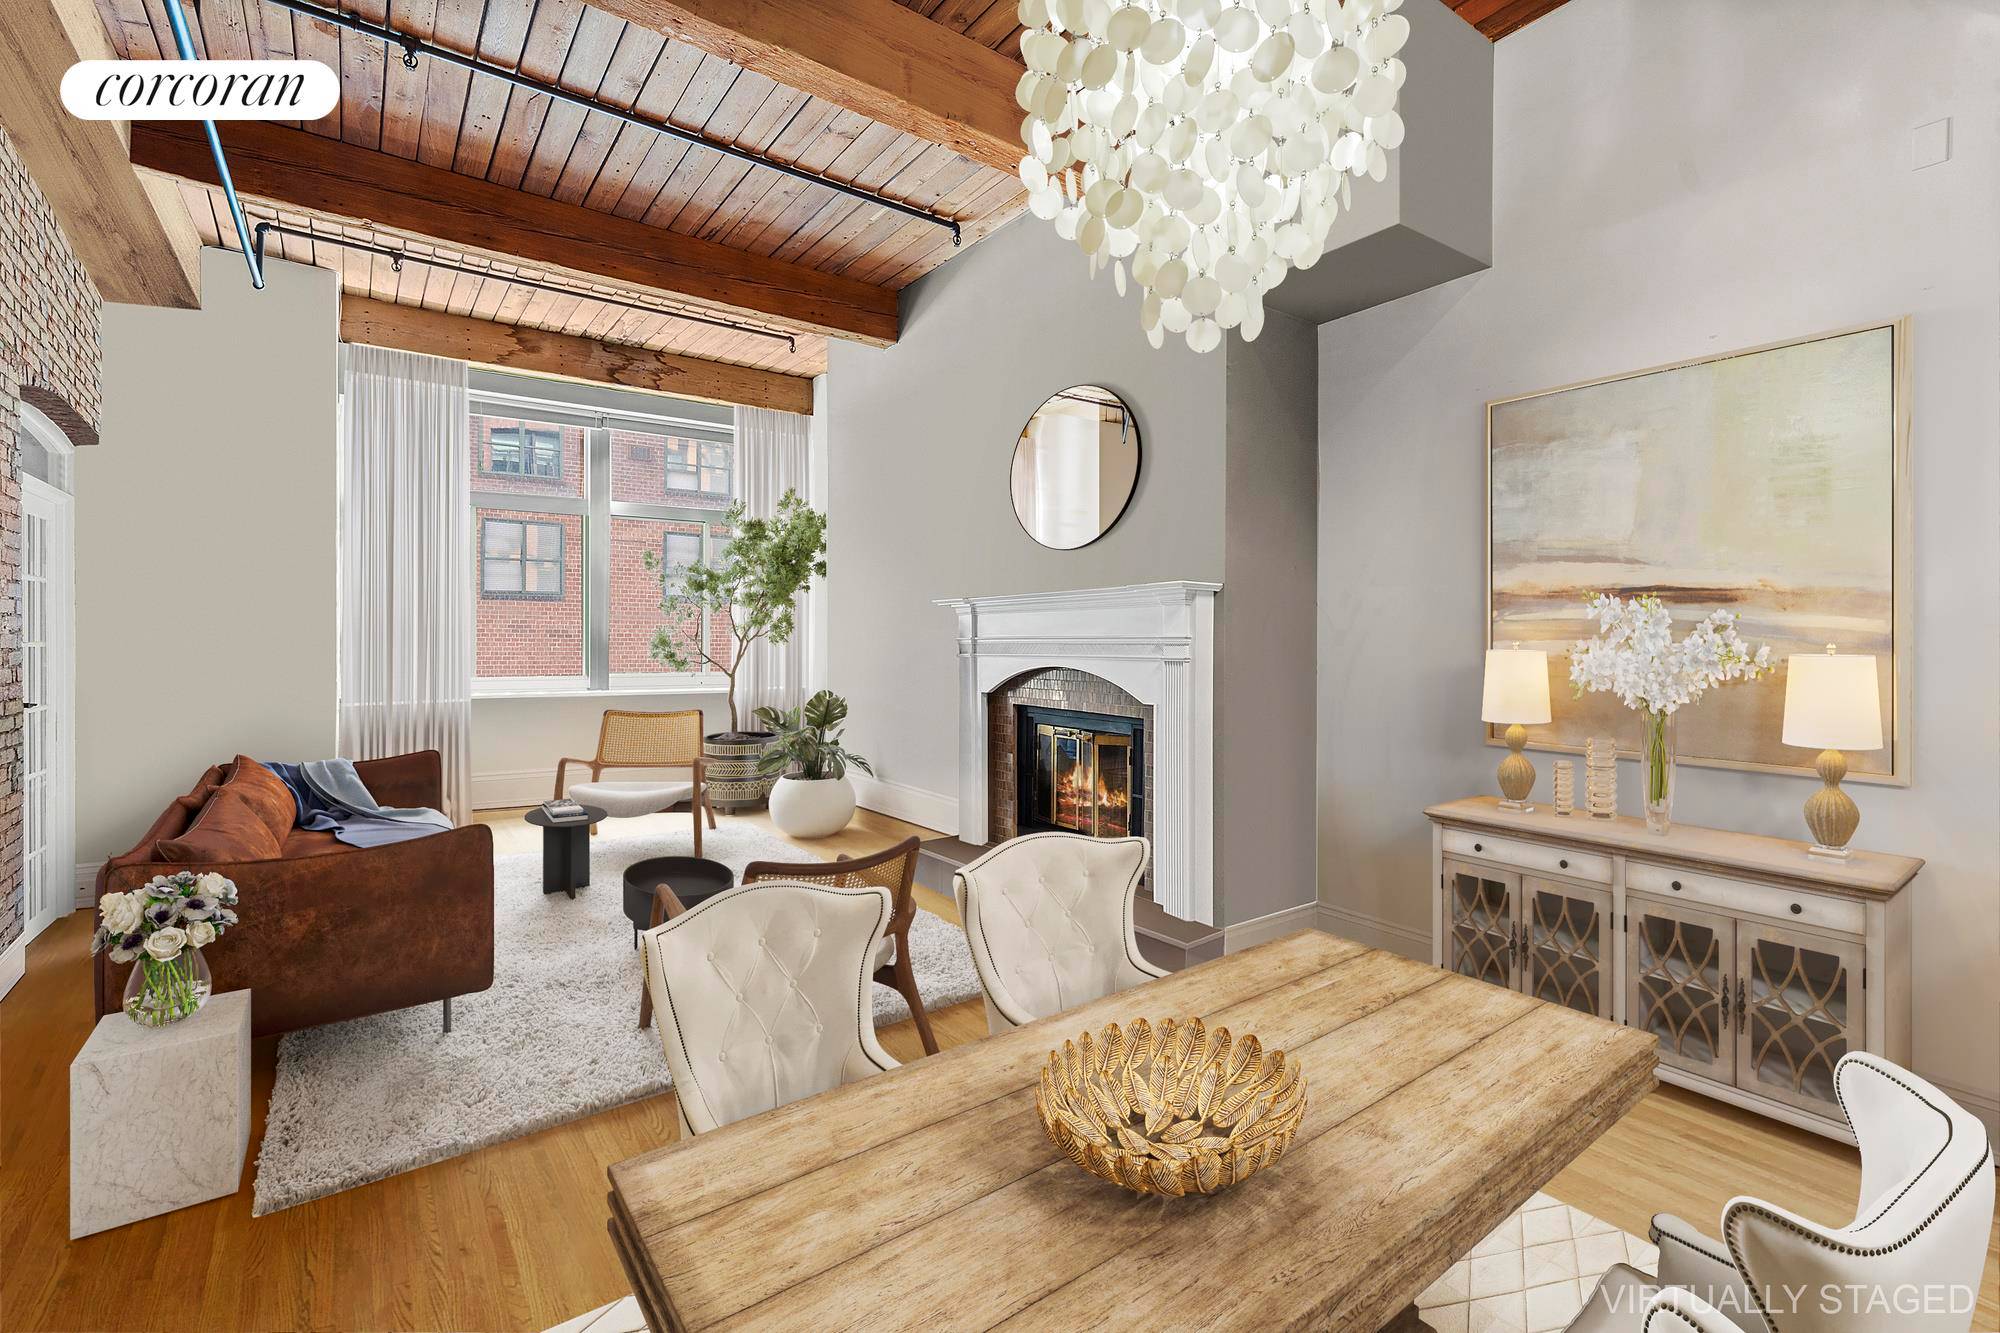 Break out of the cookie cutter mindset with this vintage loft conversion situated in the heart of Gramercy Park.